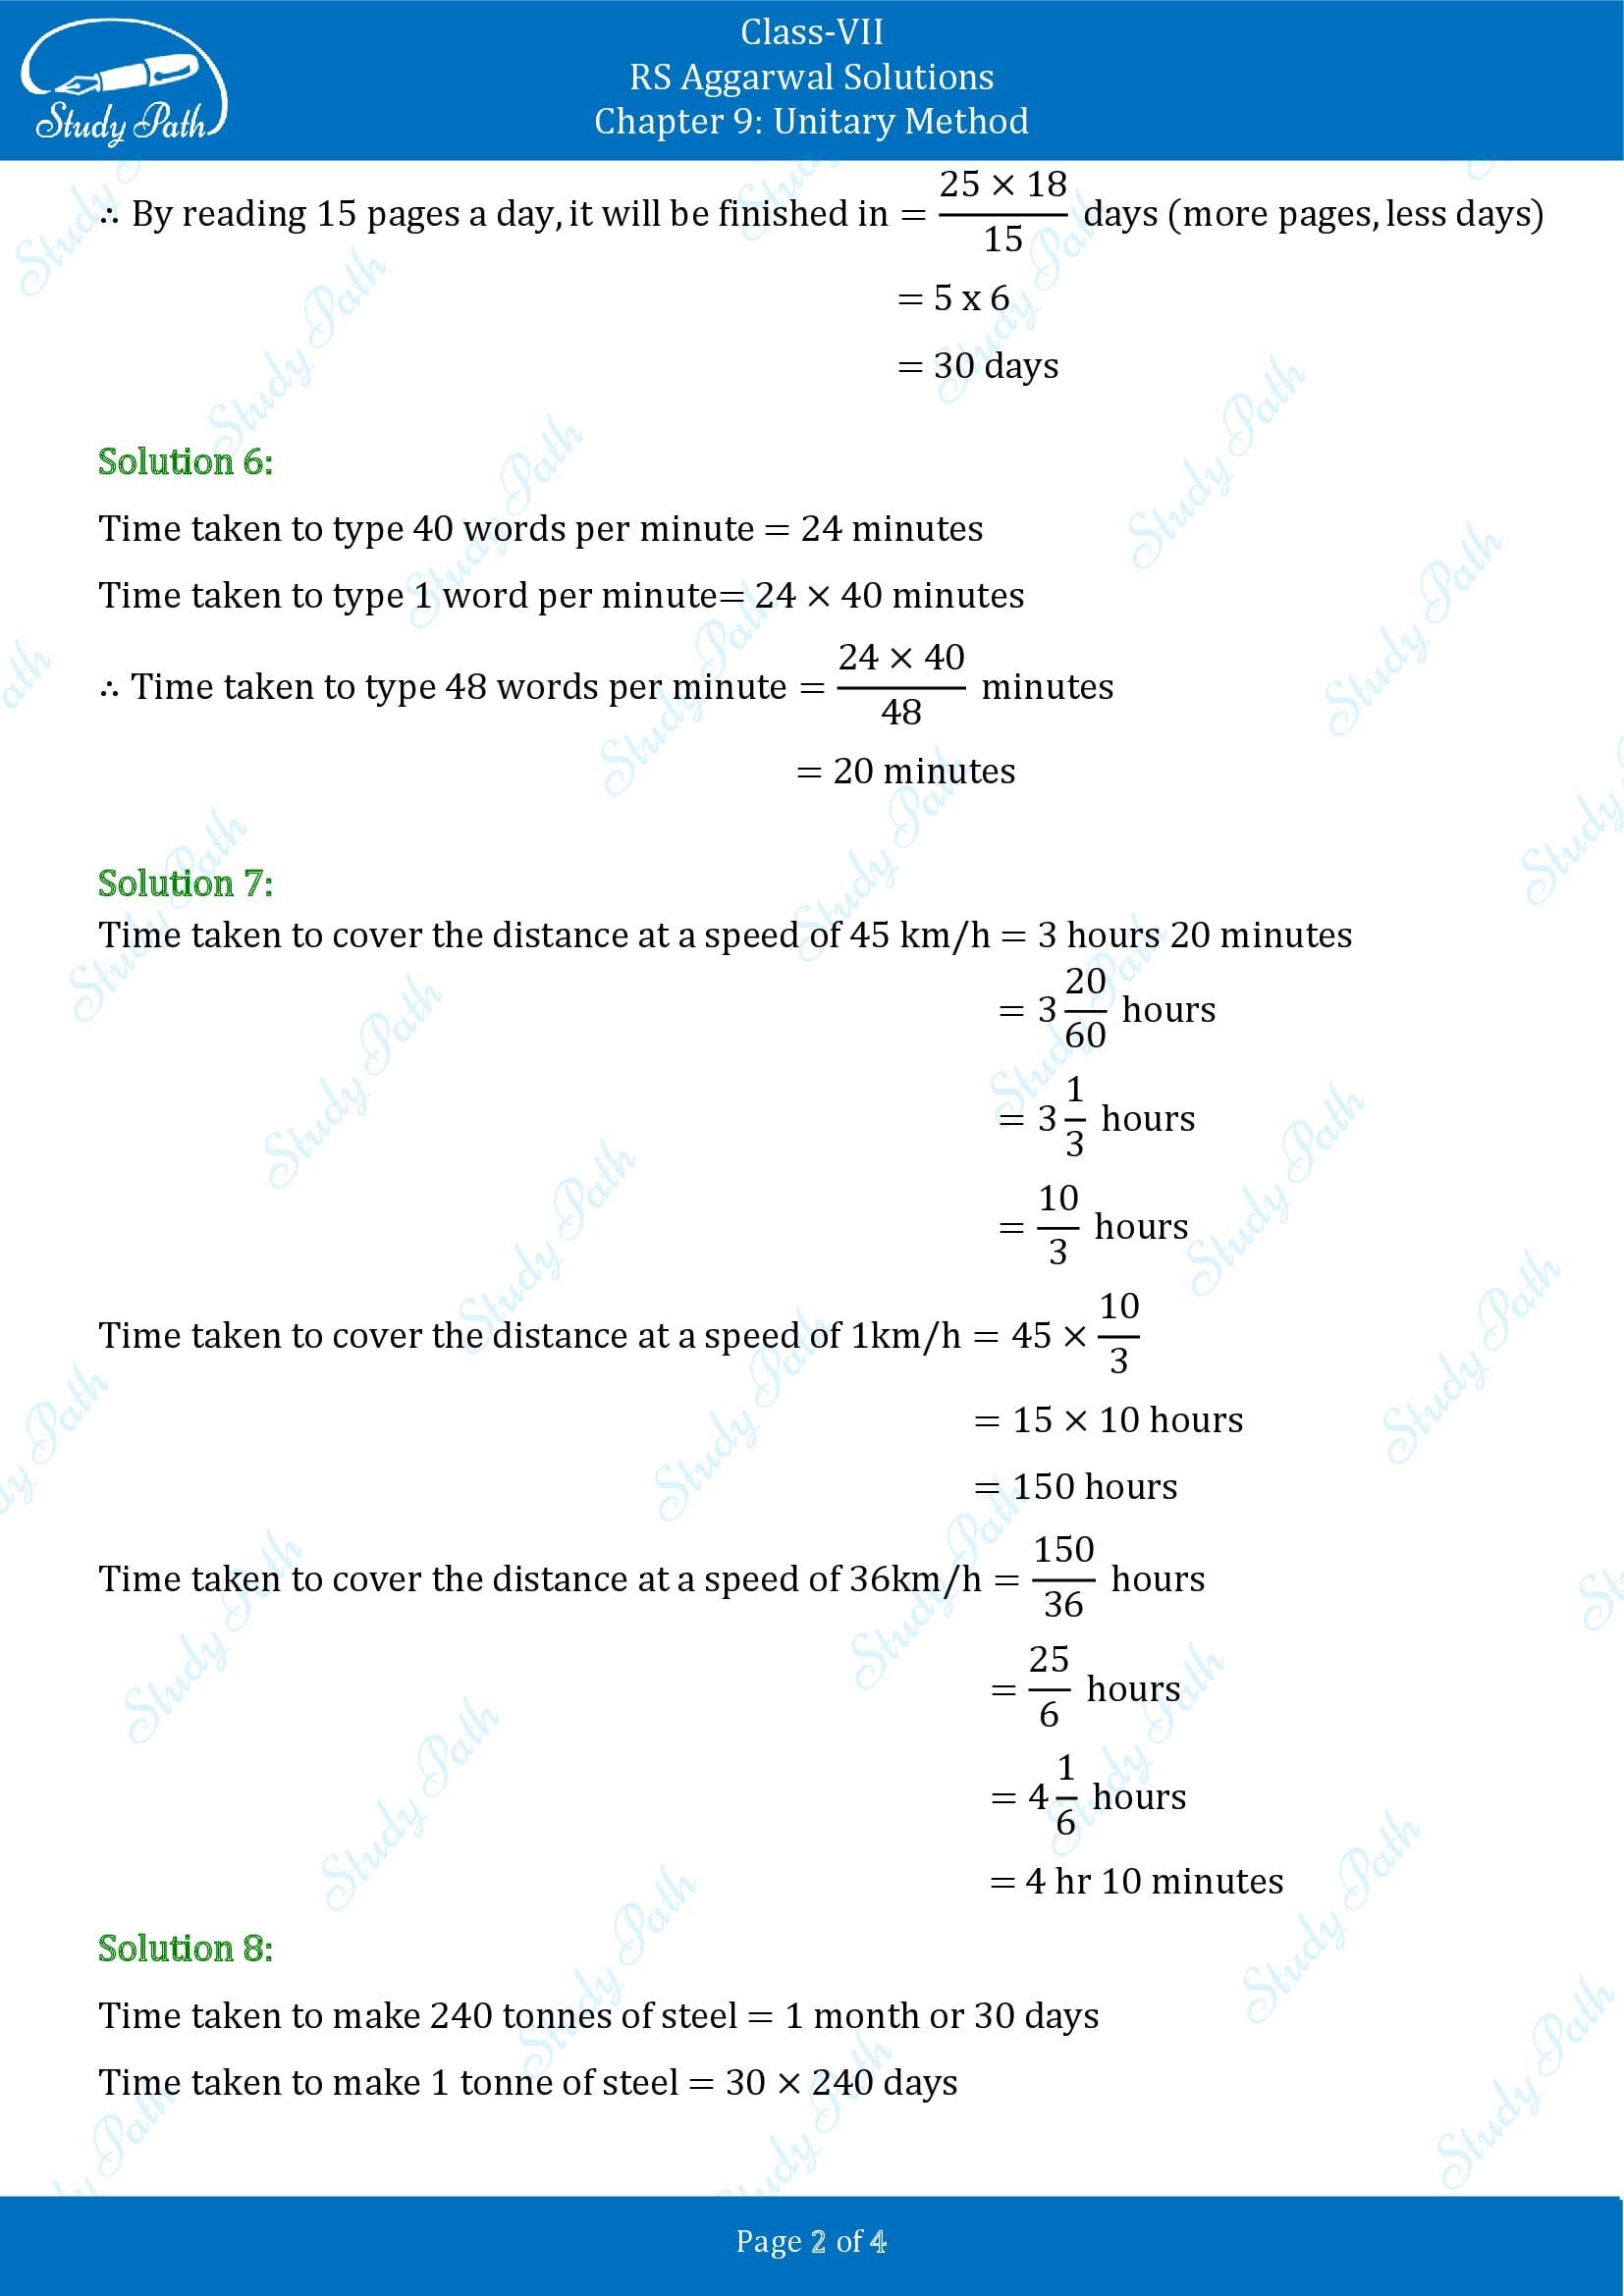 RS Aggarwal Solutions Class 7 Chapter 9 Unitary Method Exercise 9B 00002